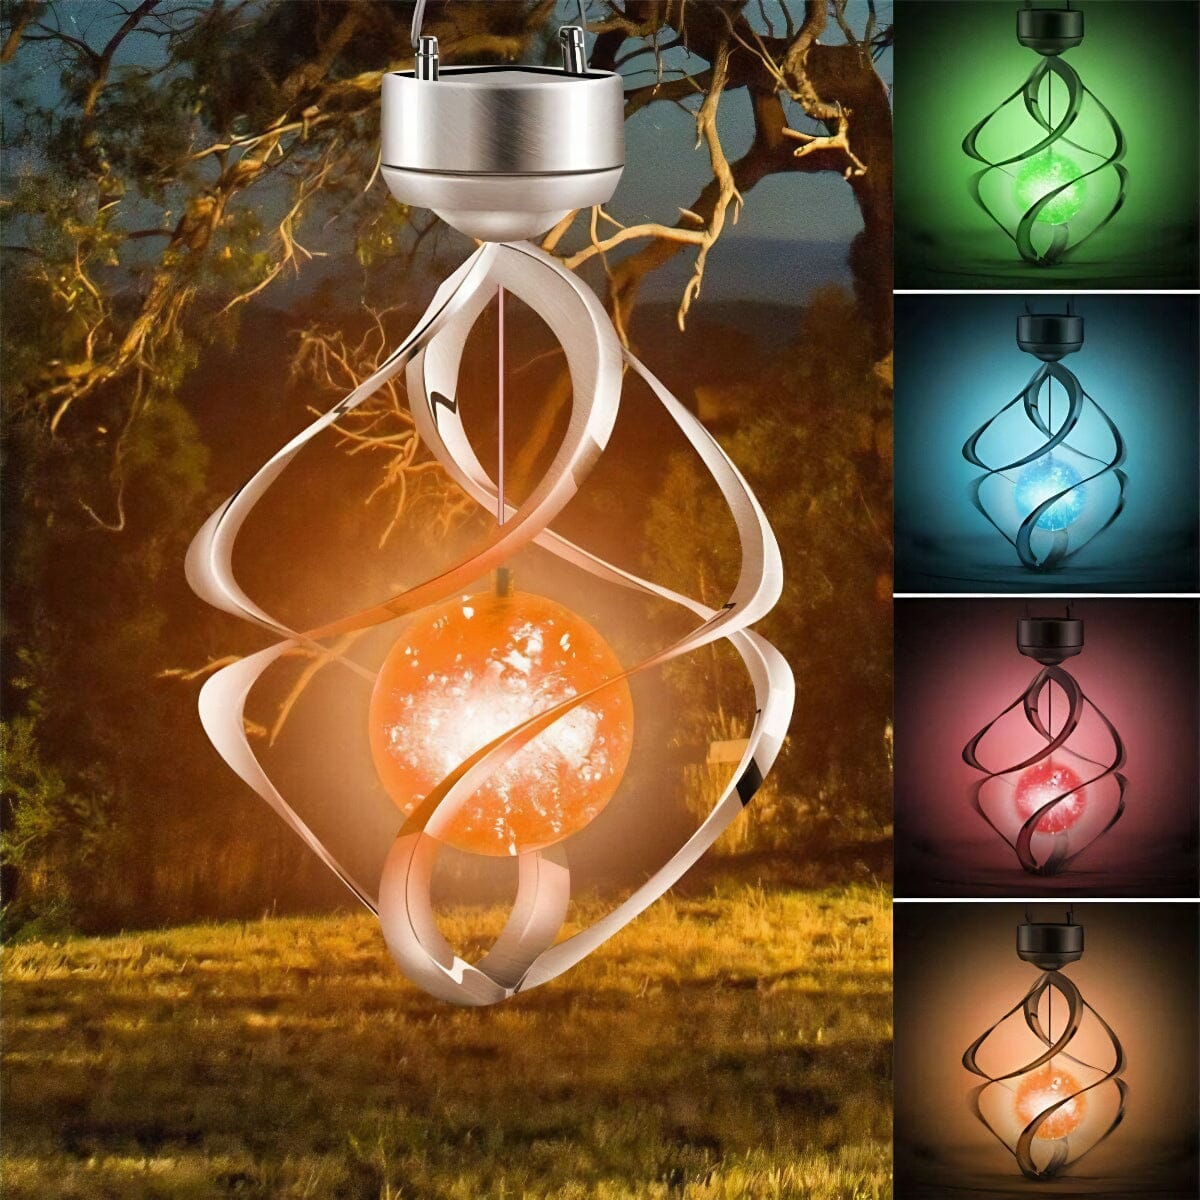 GoodVybe™ Solar Color-Changing Spiral Spinner Lamp: LED Garden Wind Chime patio light GoodVybe™ 